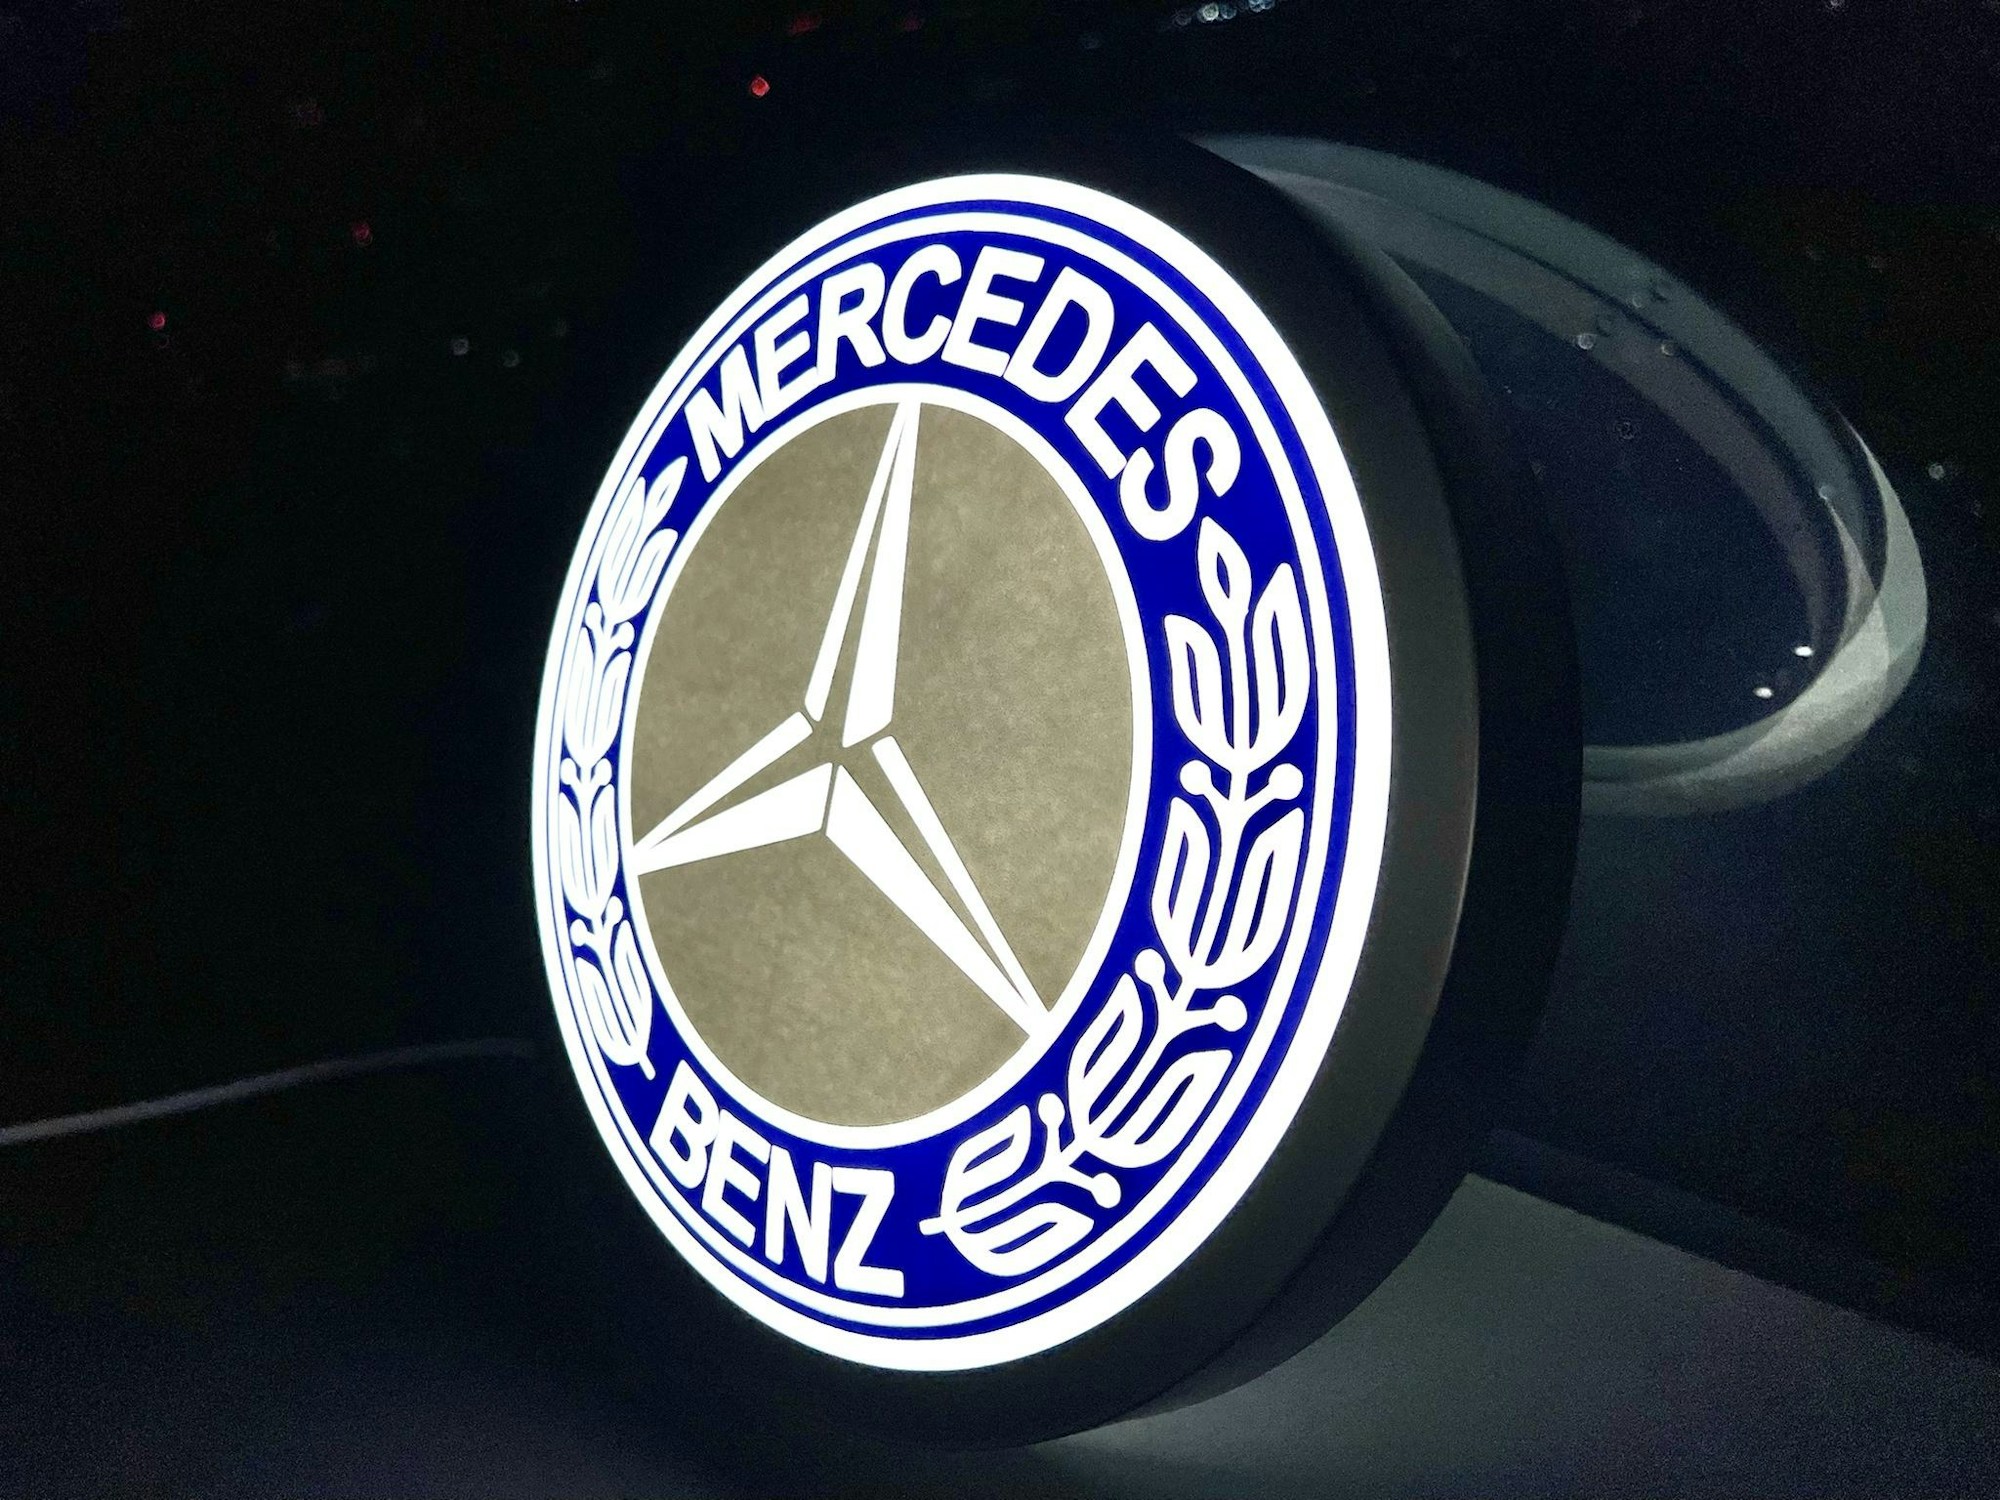 MERCEDES-BENZ ILLUMINATED SIGN for sale by auction in London